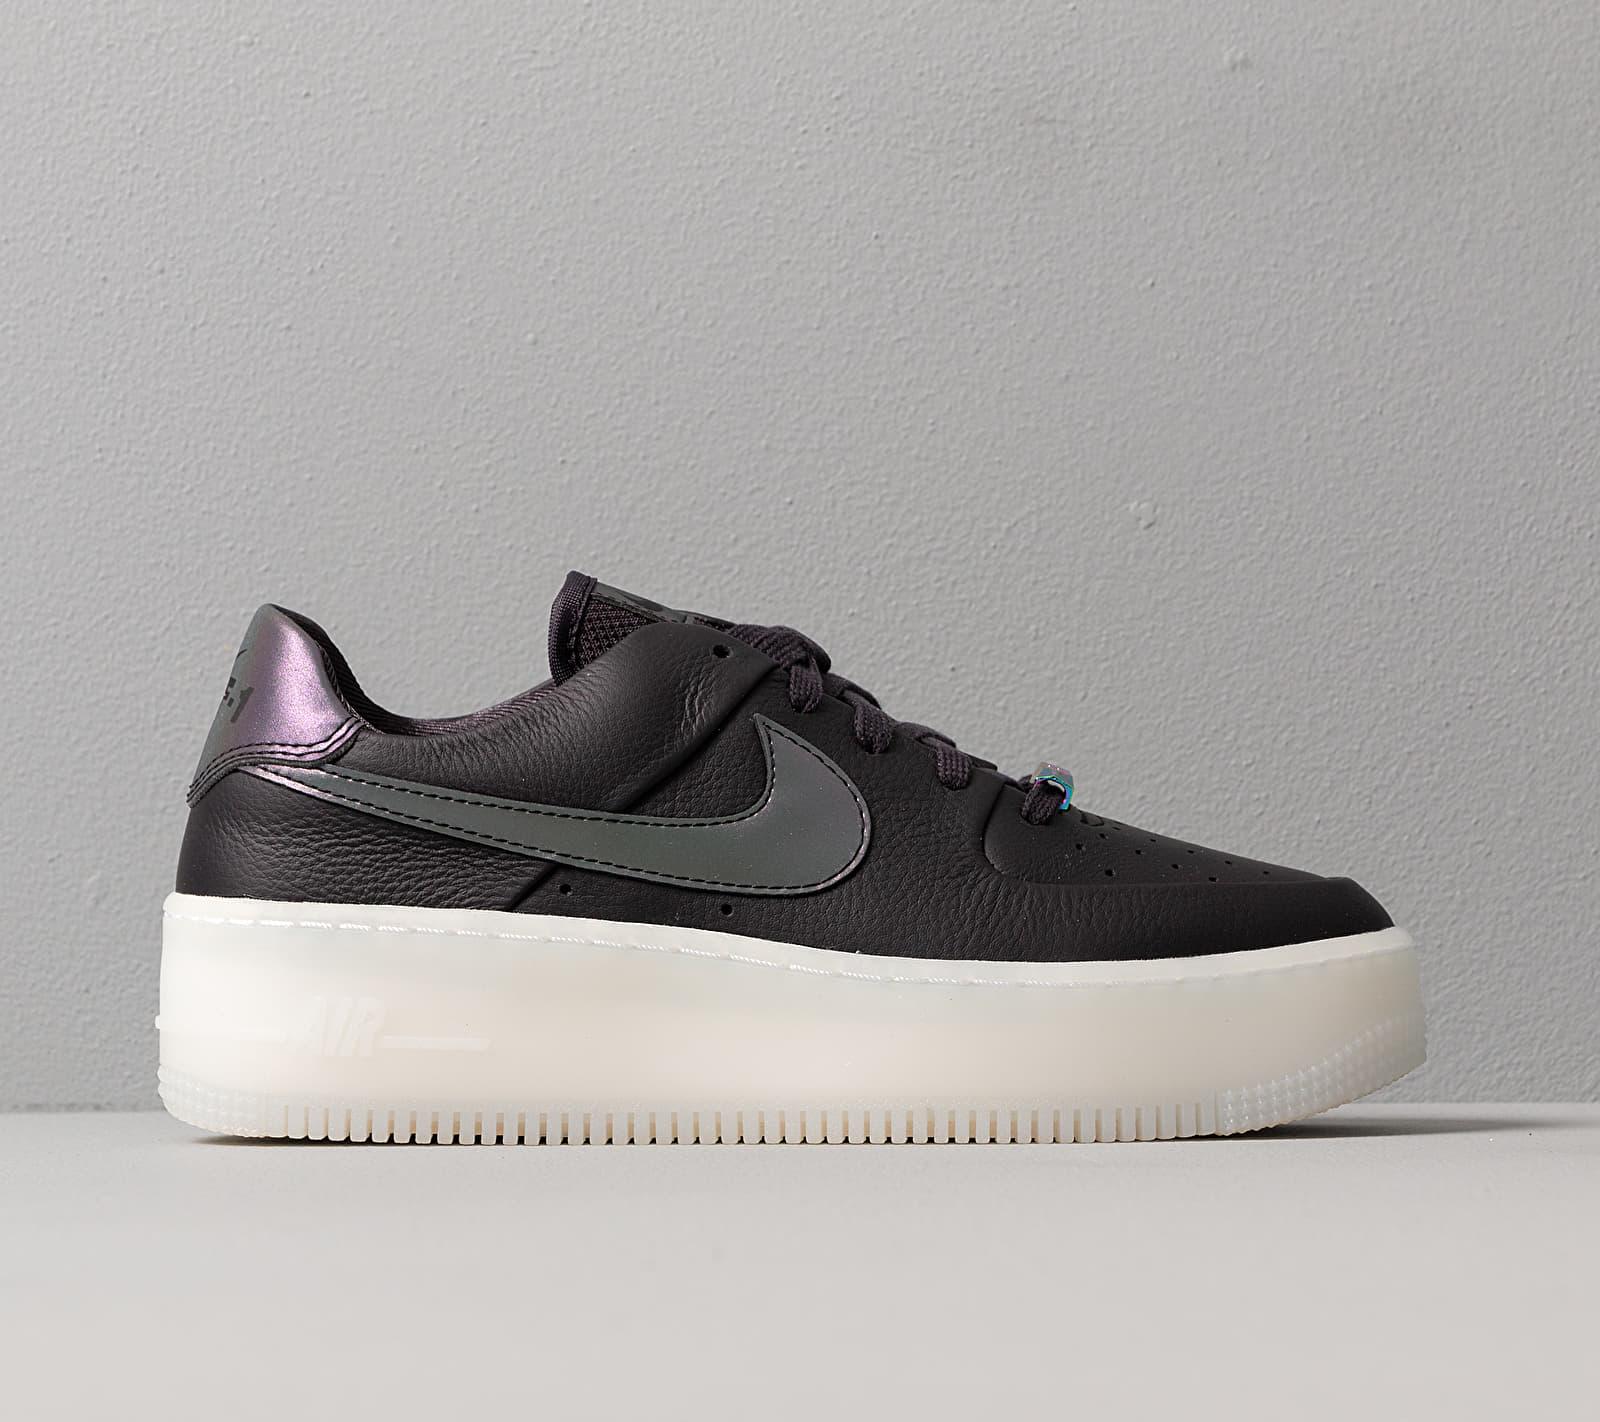 nike air force 1 oil grey | Shop The Best Discounts Online |  avsenggcollege.ac.in